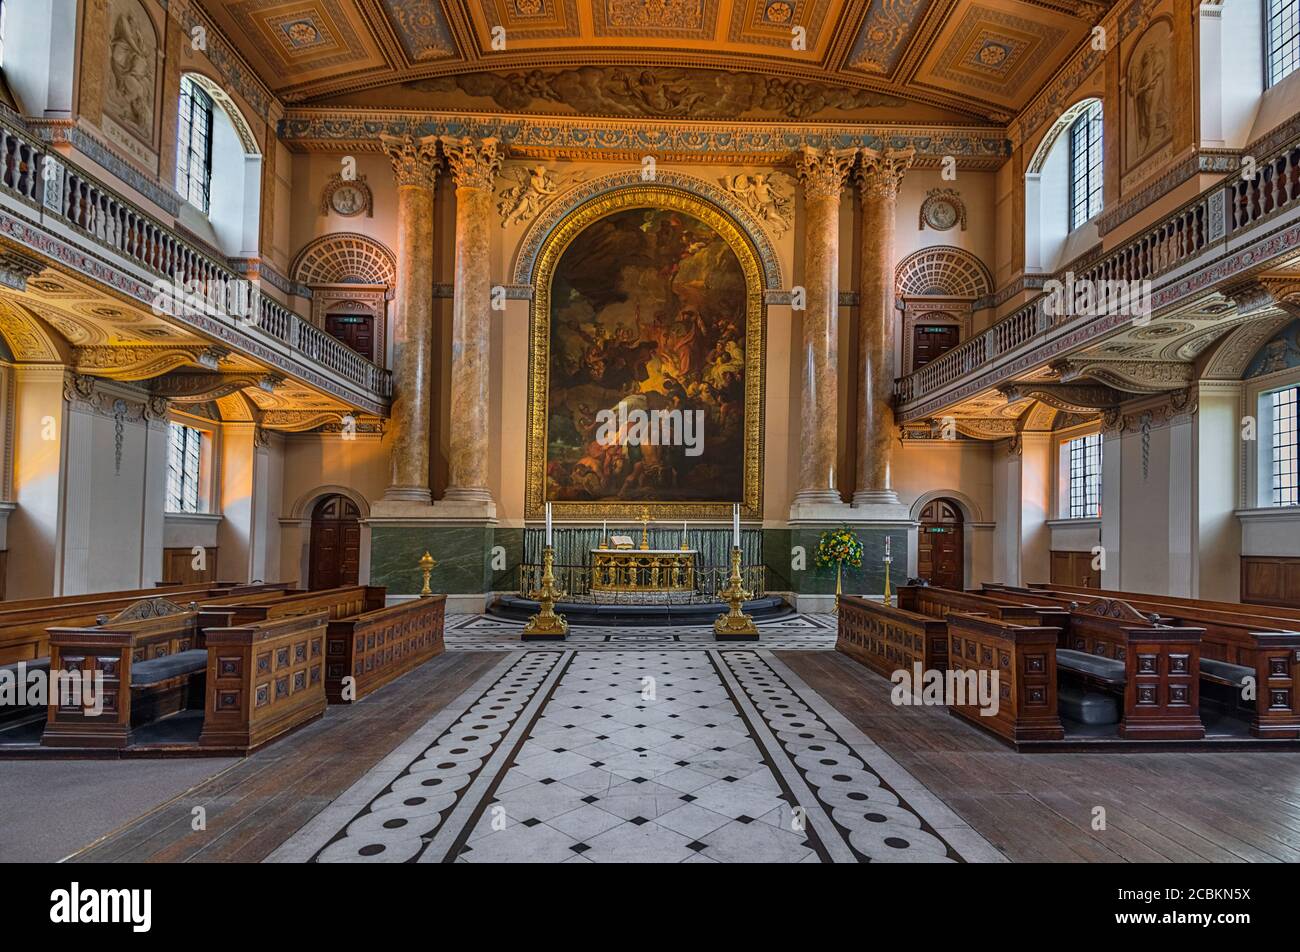 England, London, Greenwich, Old Royal Naval College, Interior of  the Chapel of St Peter and St Paul. Stock Photo